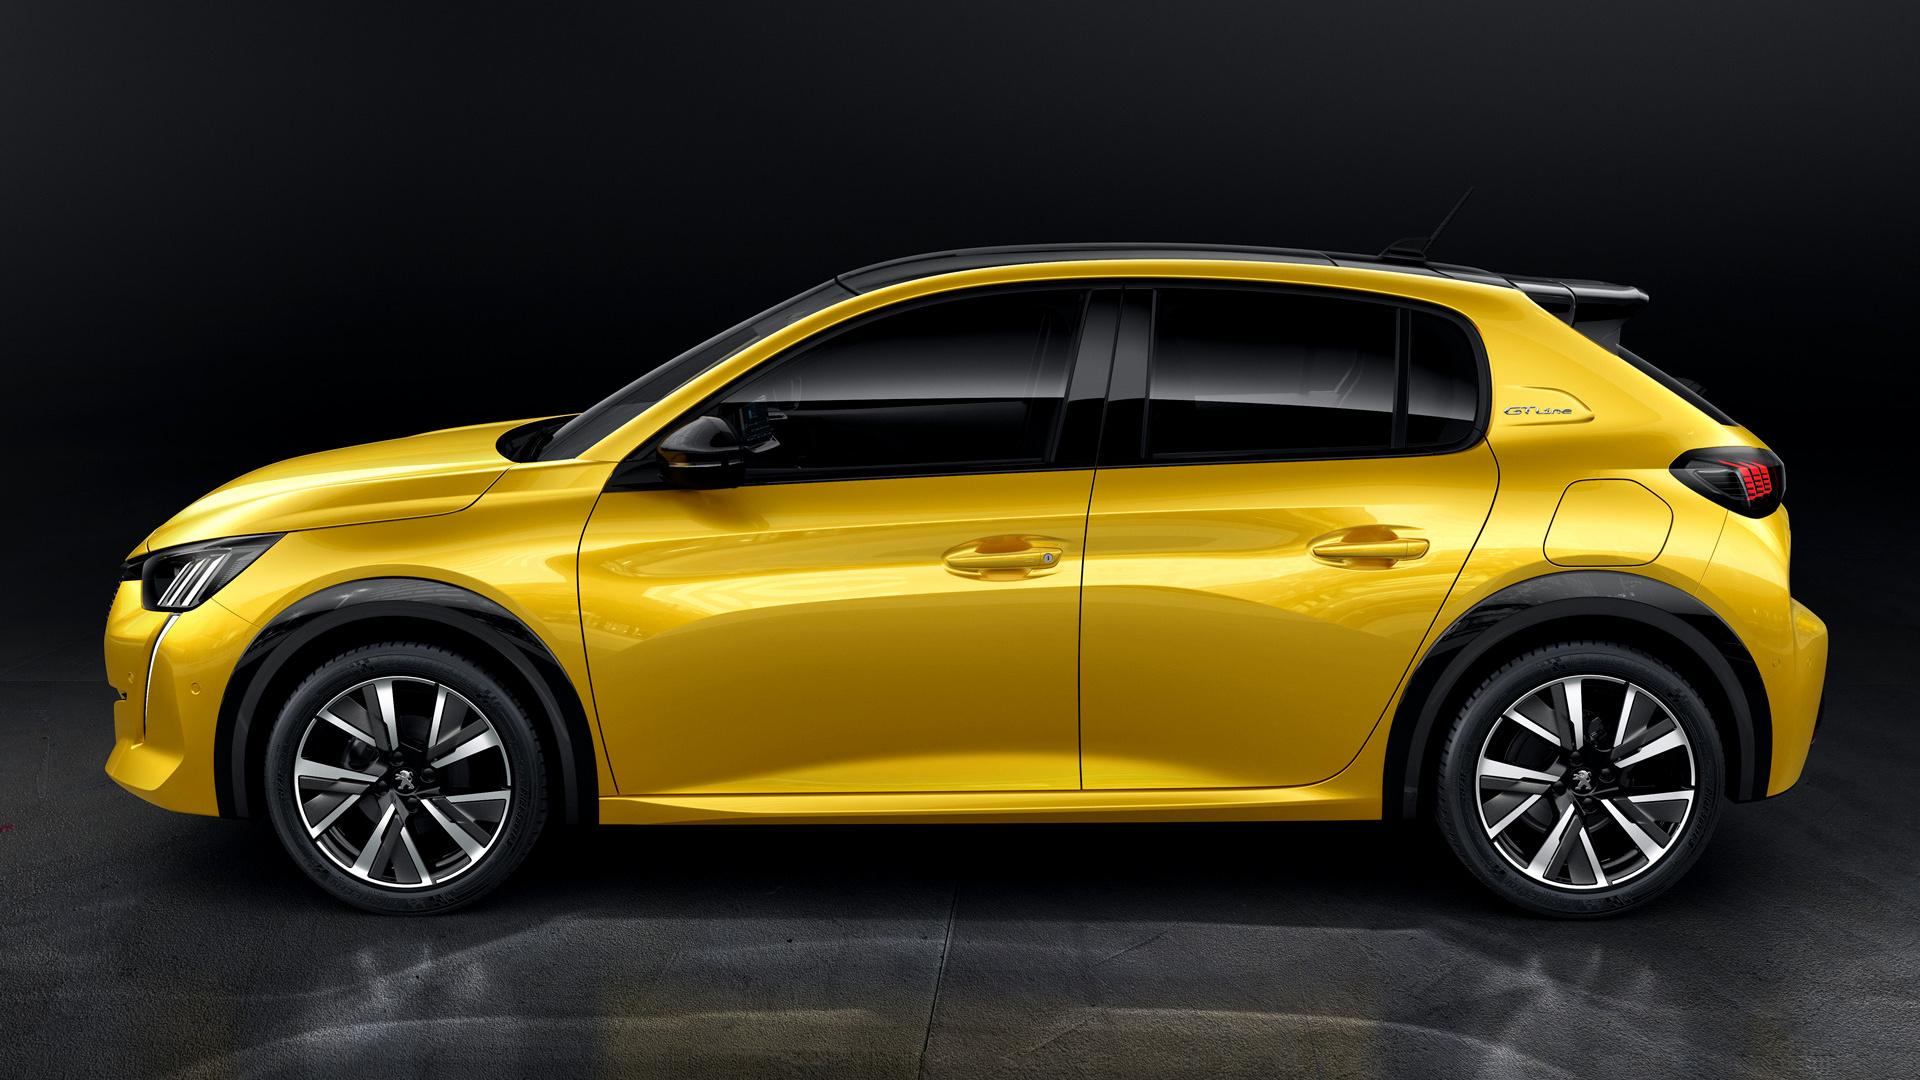 Peugeot 208 GT Line and HD Image